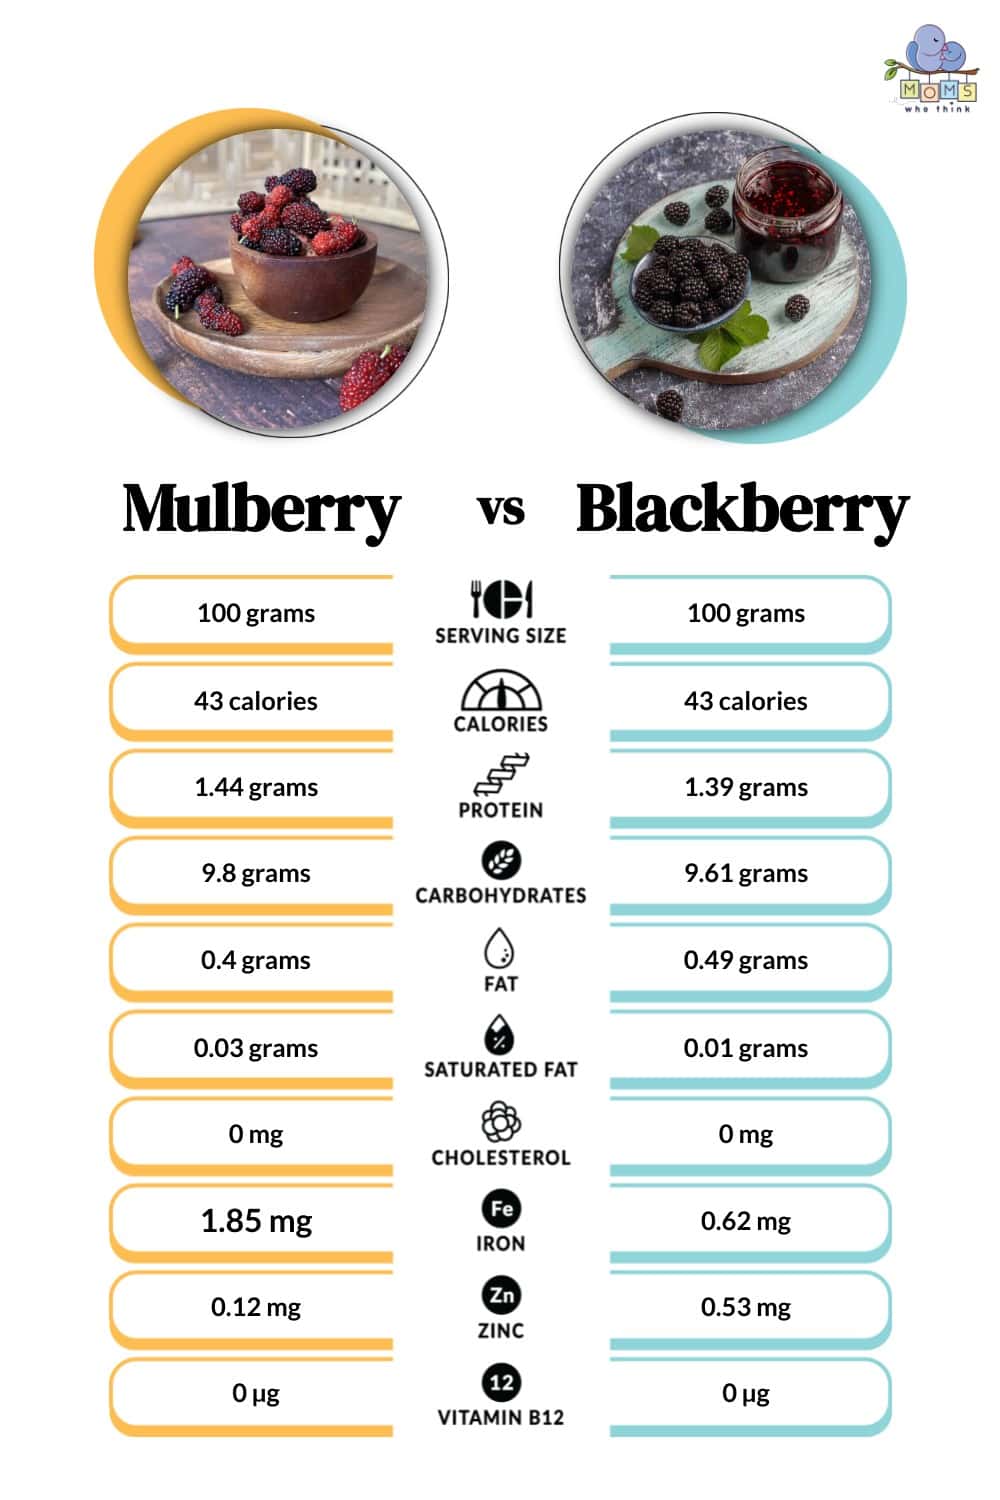 Mulberry vs Blackberry Nutritional Facts